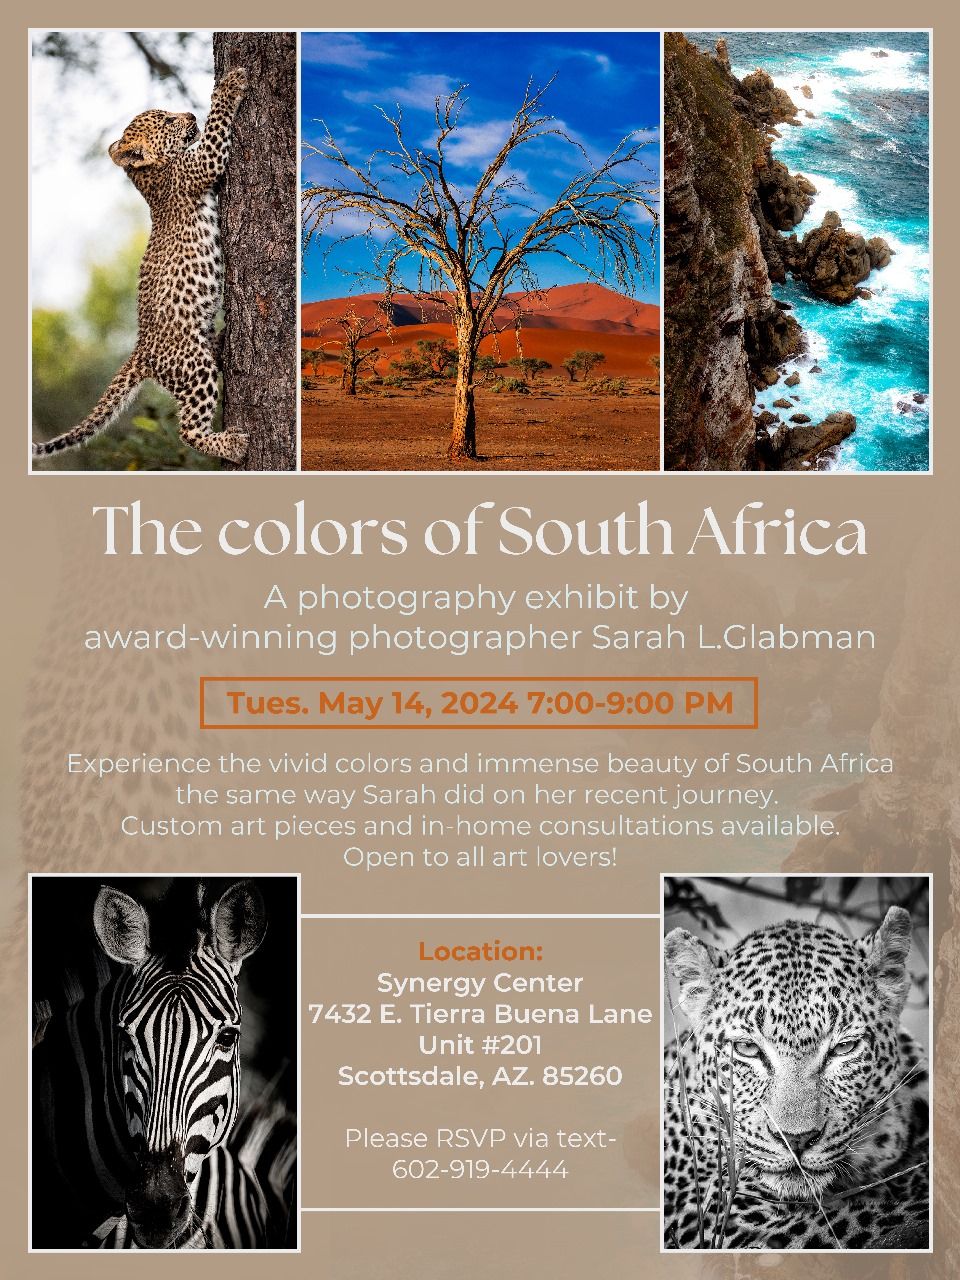 'The Colors of South Africa'- a Photo exhibit by award-winning photographer Sarah L. Glabman